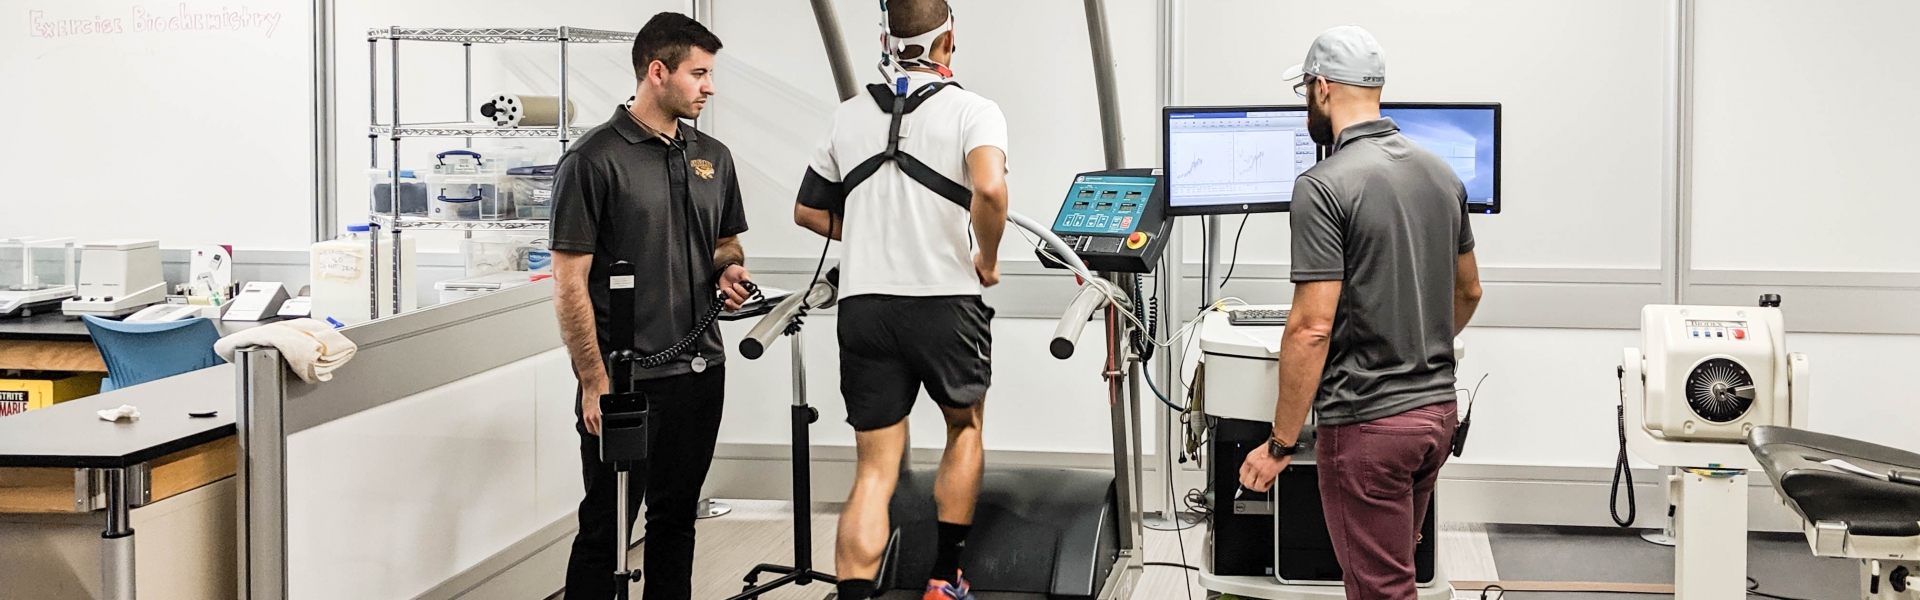 Students performing VO2max test